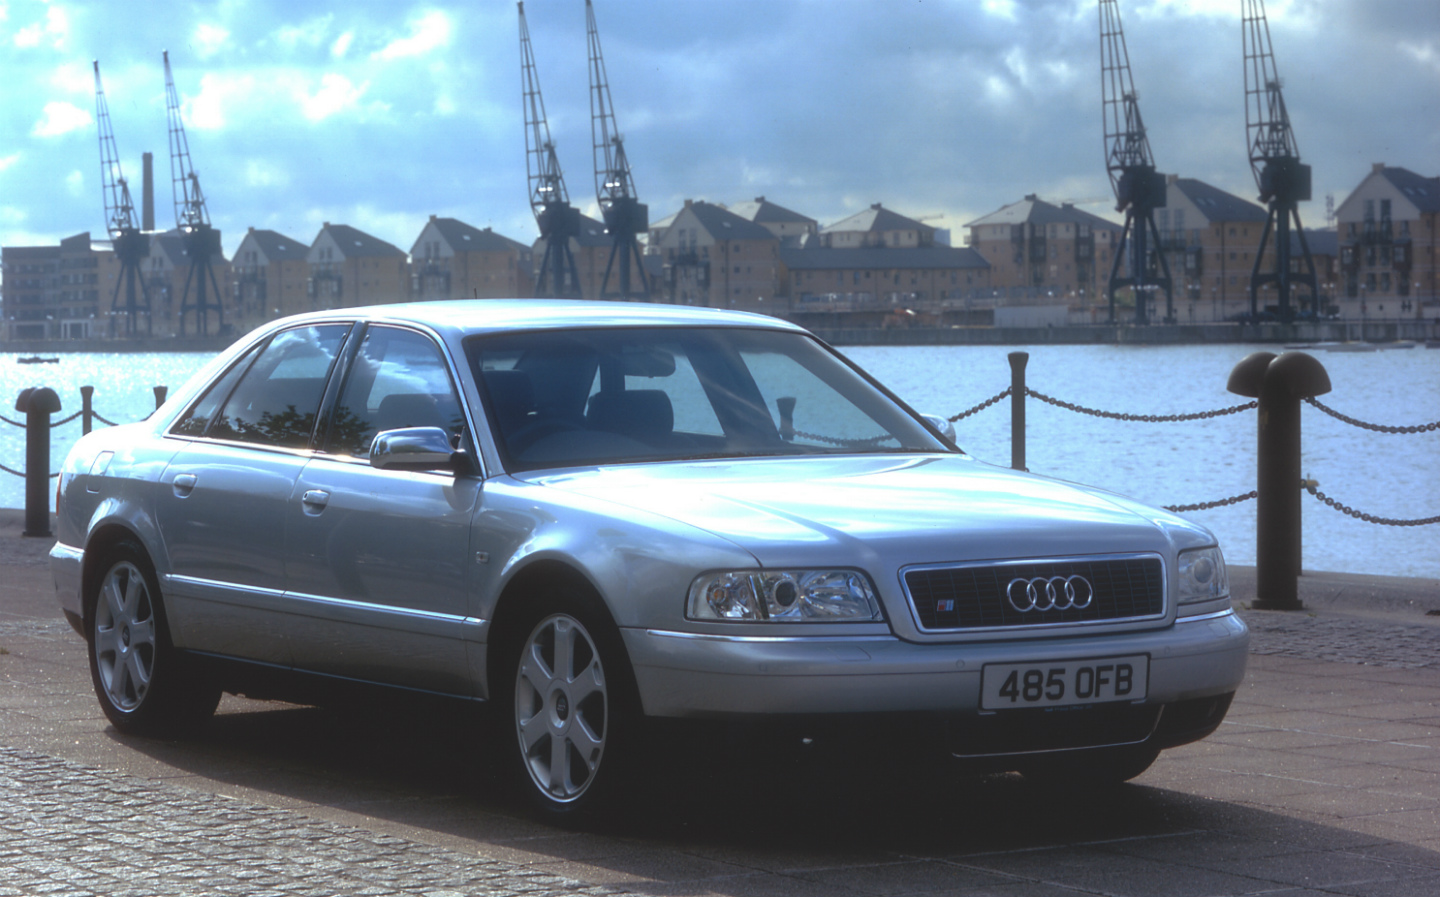 Audi S8: Drive! Philip Glenister's favourite getaway cars at the London Classic Car Show